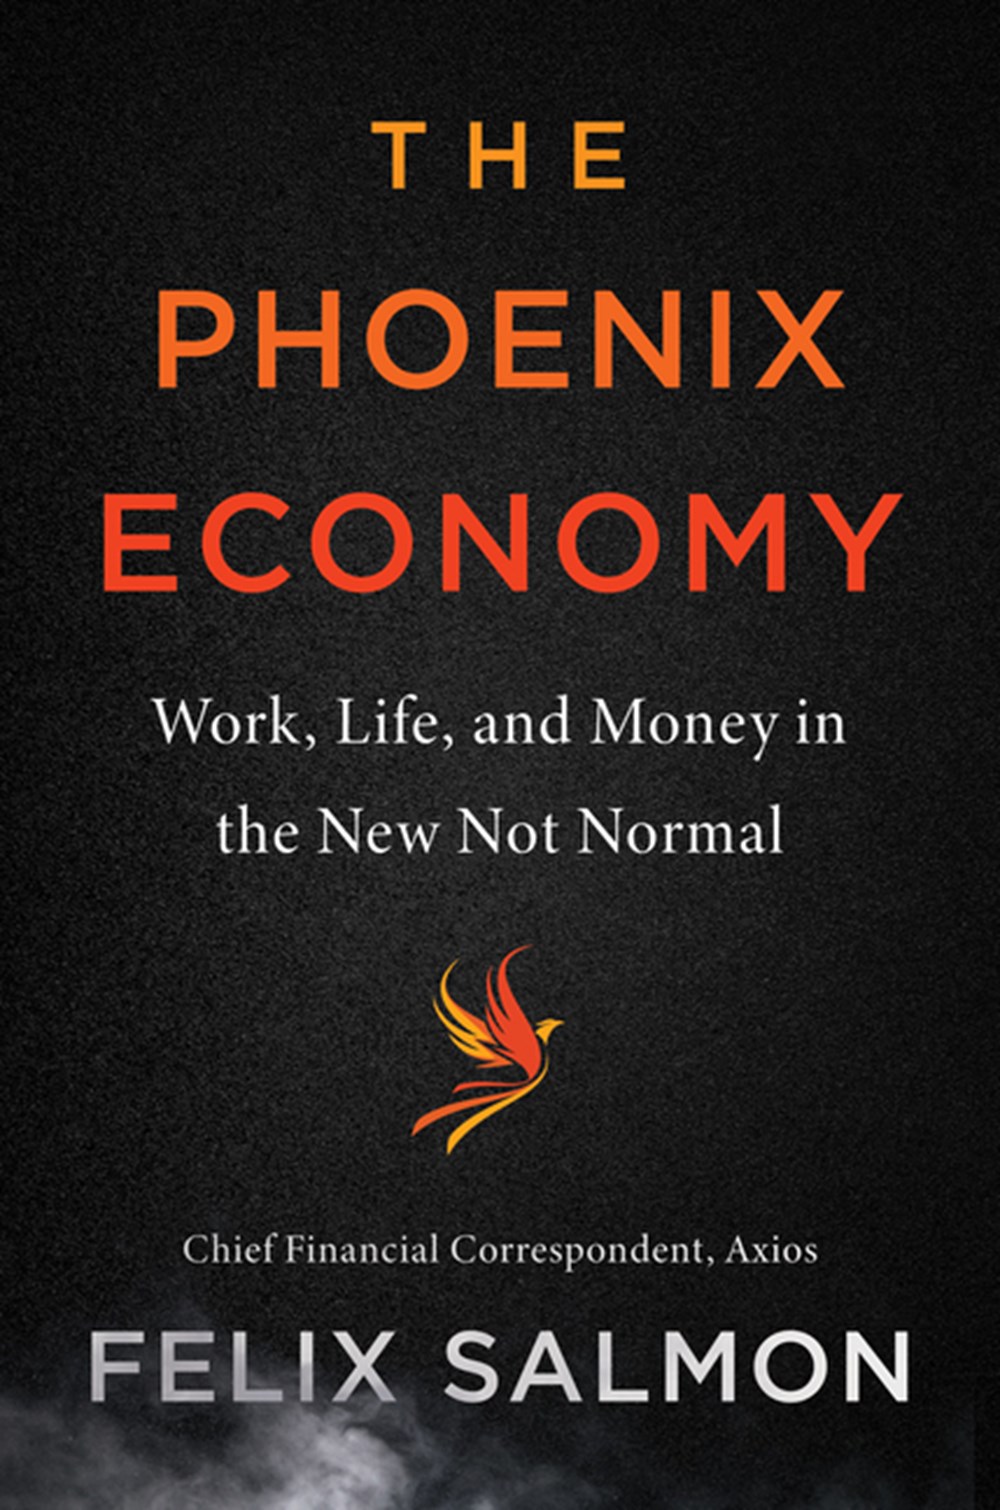 Phoenix Economy: Work, Life, and Money in the New Not Normal